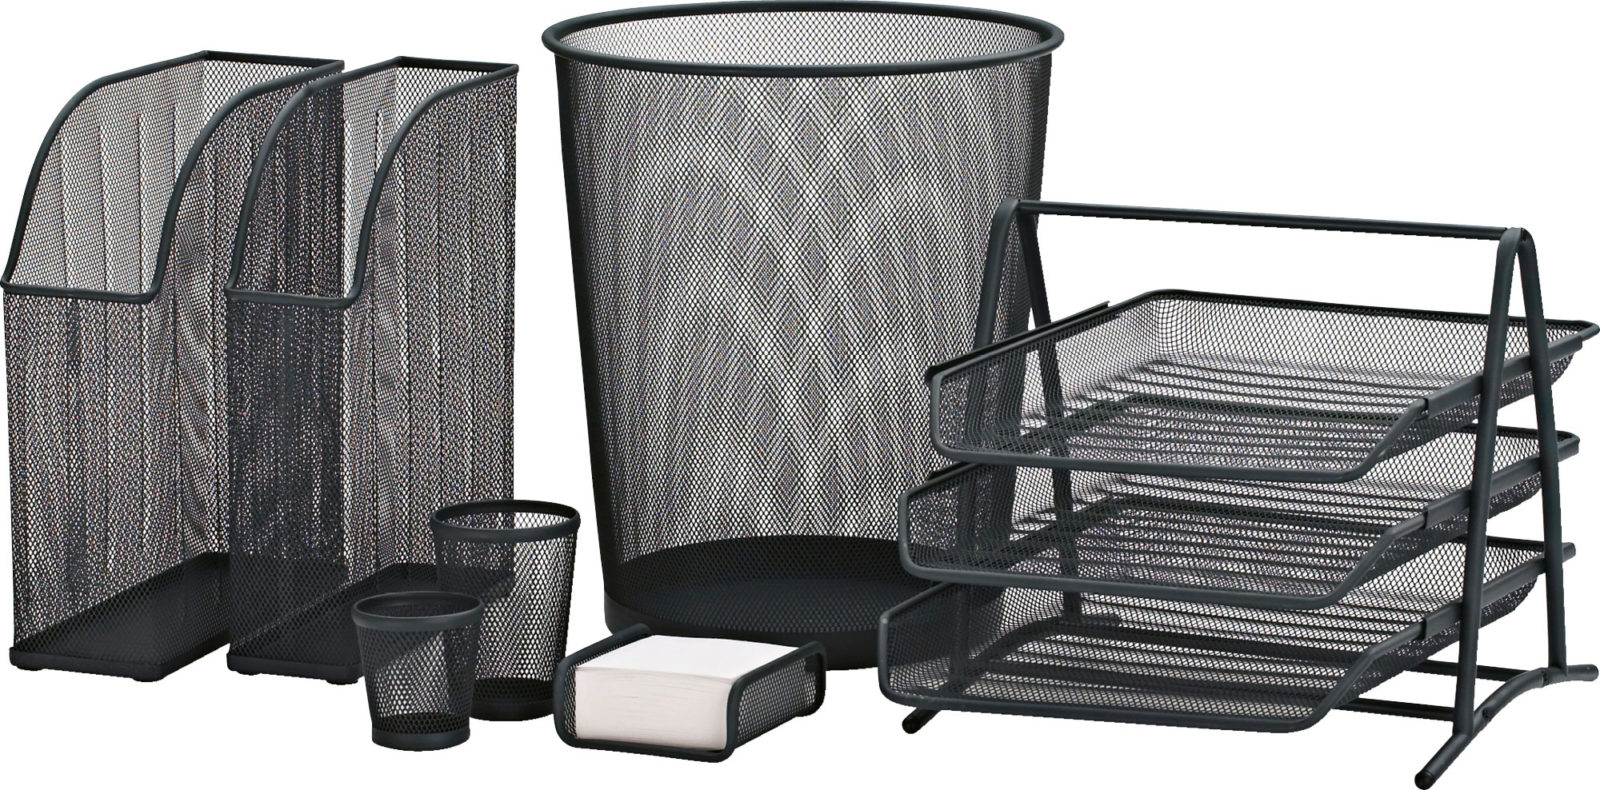 Storage products made of black expanded metal, including magazine files, wastepaper basket and document tray, DOKUMENT.